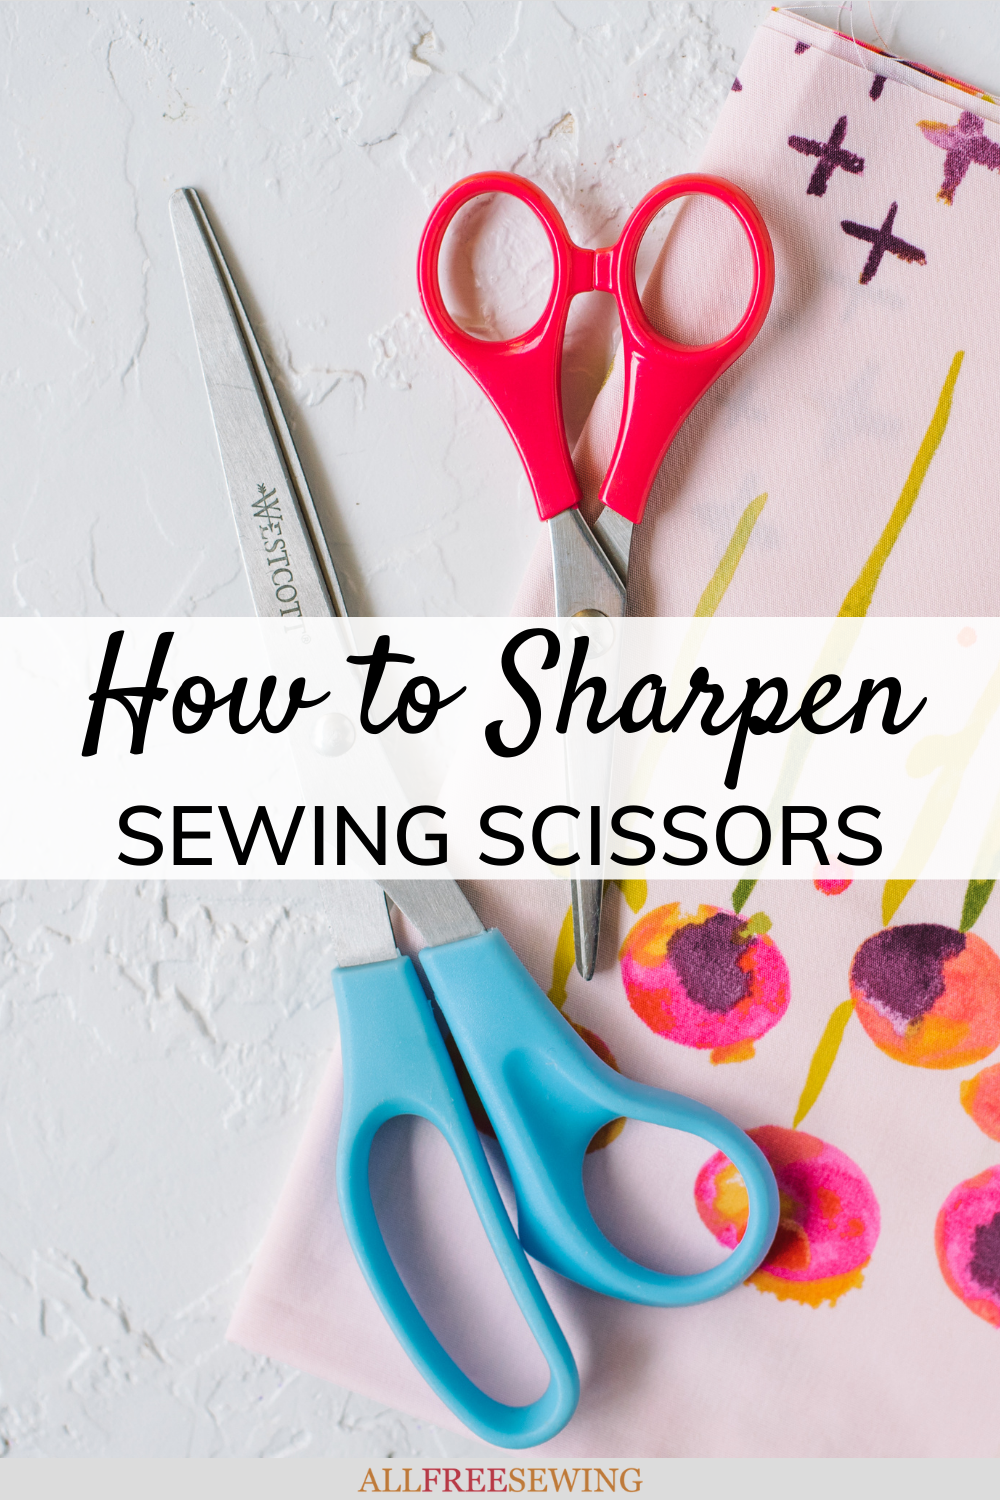 https://irepo.primecp.com/2021/08/500811/How-to-Sharpen-Sewing-Scissors-pin21-1_UserCommentImage_ID-4422740.png?v=4422740